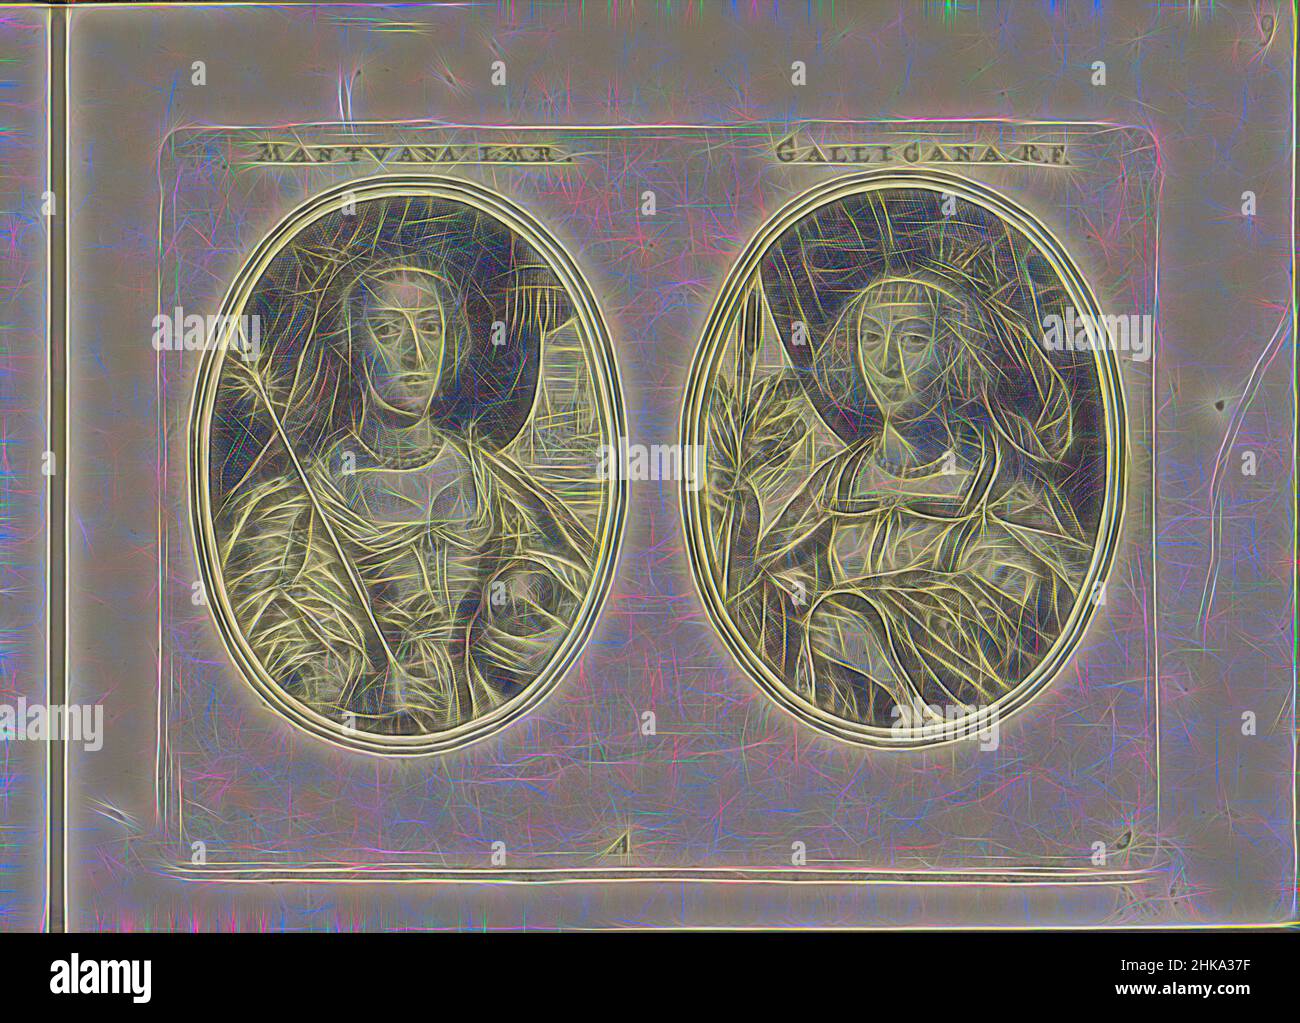 Inspired by Portraits of Eleanor of Mantua and Anna of Austria, both as shepherdesses, Mantuana I.M.R., Galligana R.F., Les vrais pourtraits de quelques unes des plus grandes dames de la chrestiente desguisees en bergeres., Two representations on an album leaf. On the left, the portrait of Eleanor of, Reimagined by Artotop. Classic art reinvented with a modern twist. Design of warm cheerful glowing of brightness and light ray radiance. Photography inspired by surrealism and futurism, embracing dynamic energy of modern technology, movement, speed and revolutionize culture Stock Photo